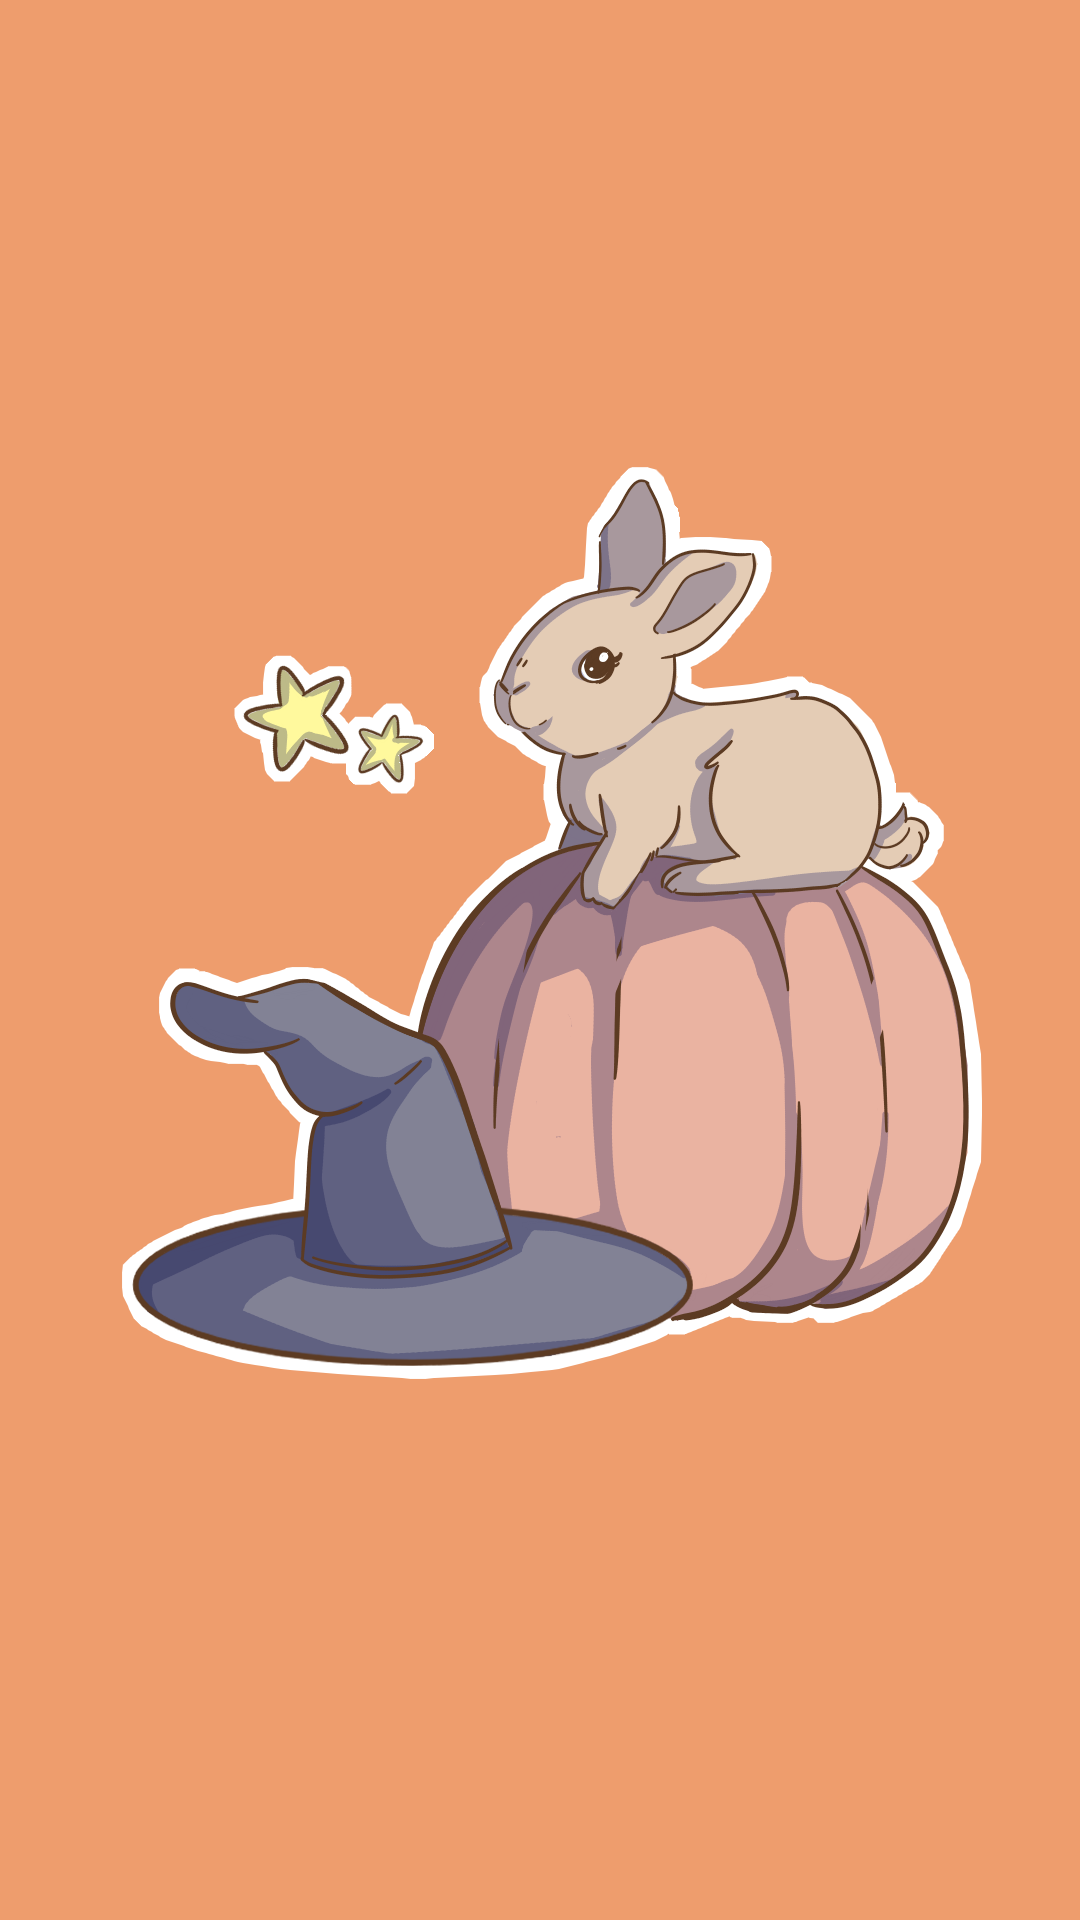 I made this Halloween wallpaper for your phone ♥ Hoppy Halloween